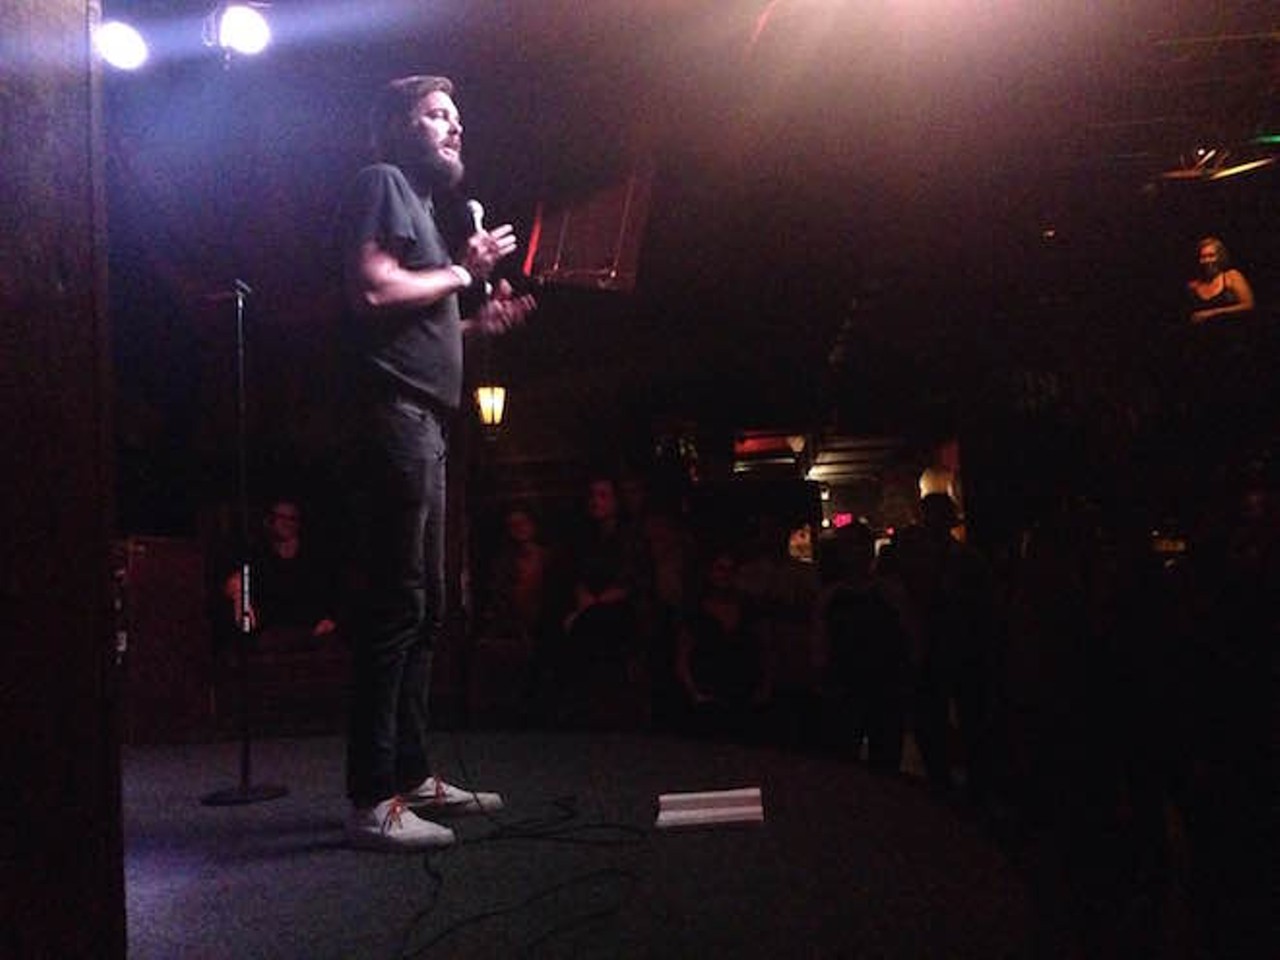 Comedian Nick Thune had some hot takes at Backbooth.